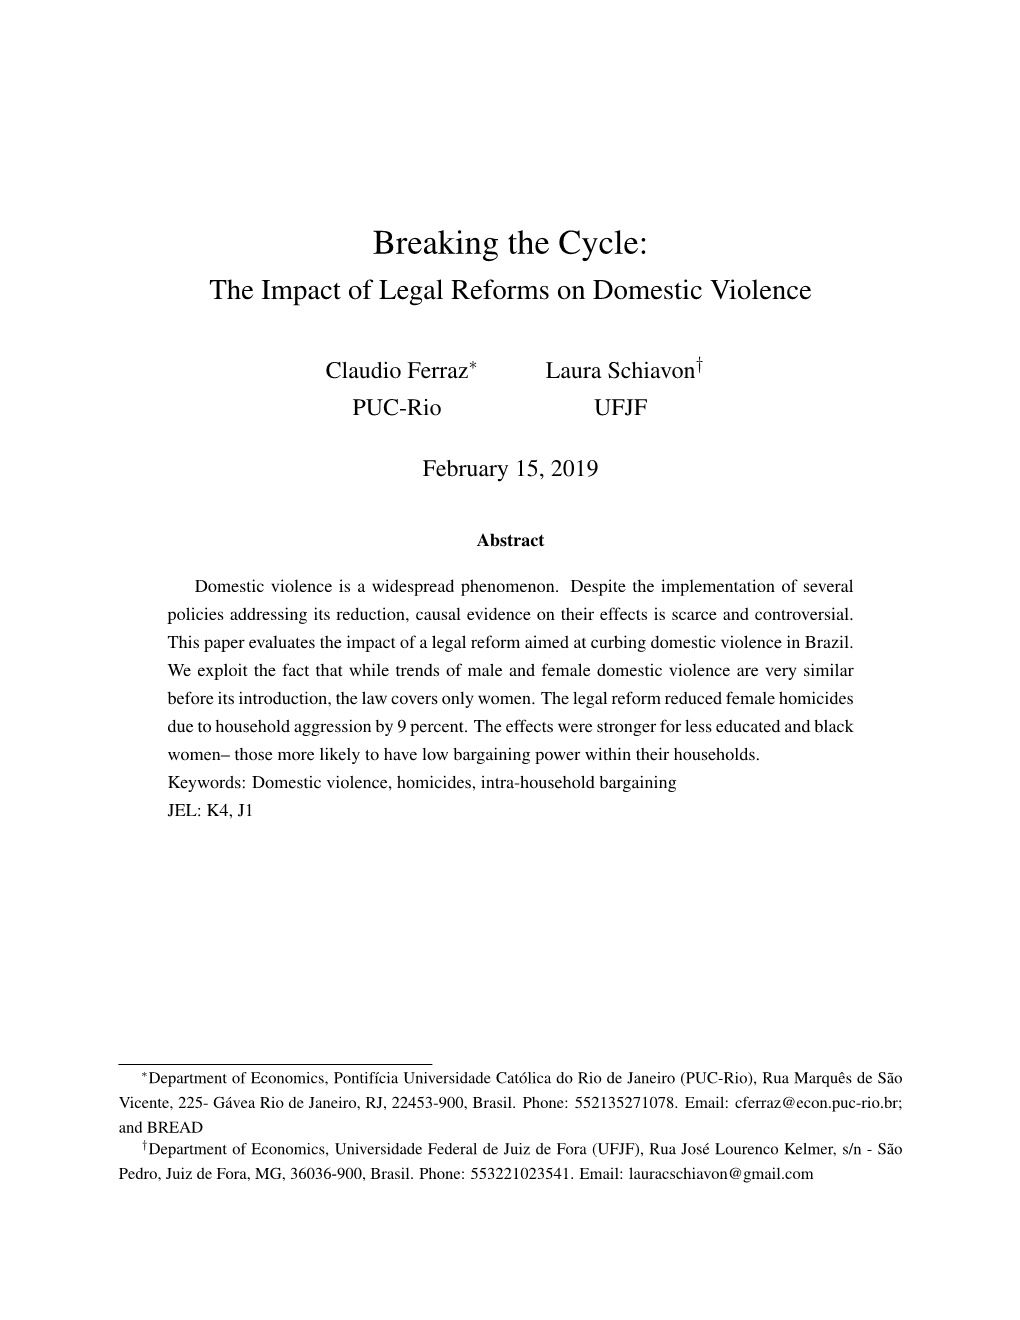 Breaking the Cycle: the Impact of Legal Reforms on Domestic Violence